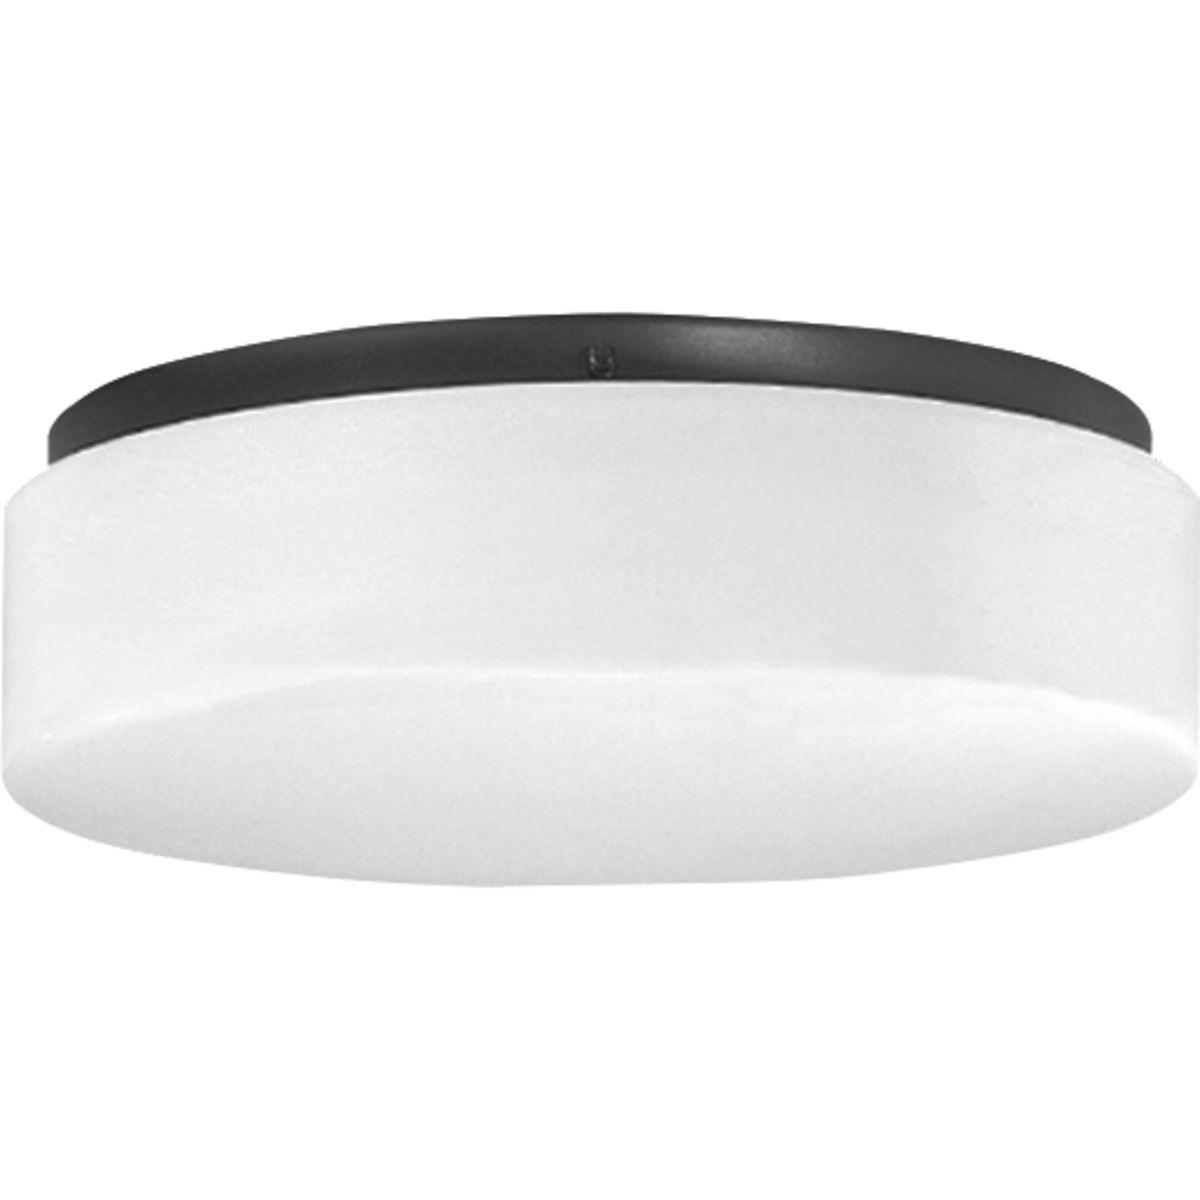 Hubbell P730005-031-30 LED flush mount with white acrylic diffuser mounts to baked enamel ceiling pan. Twist on installation with a single locking thumb screw. ETL approved for damp locations. Ceiling or wall mount. 1680 lumens, 80 lumens/watt (delivered), 3000K and 90CRI. ENER